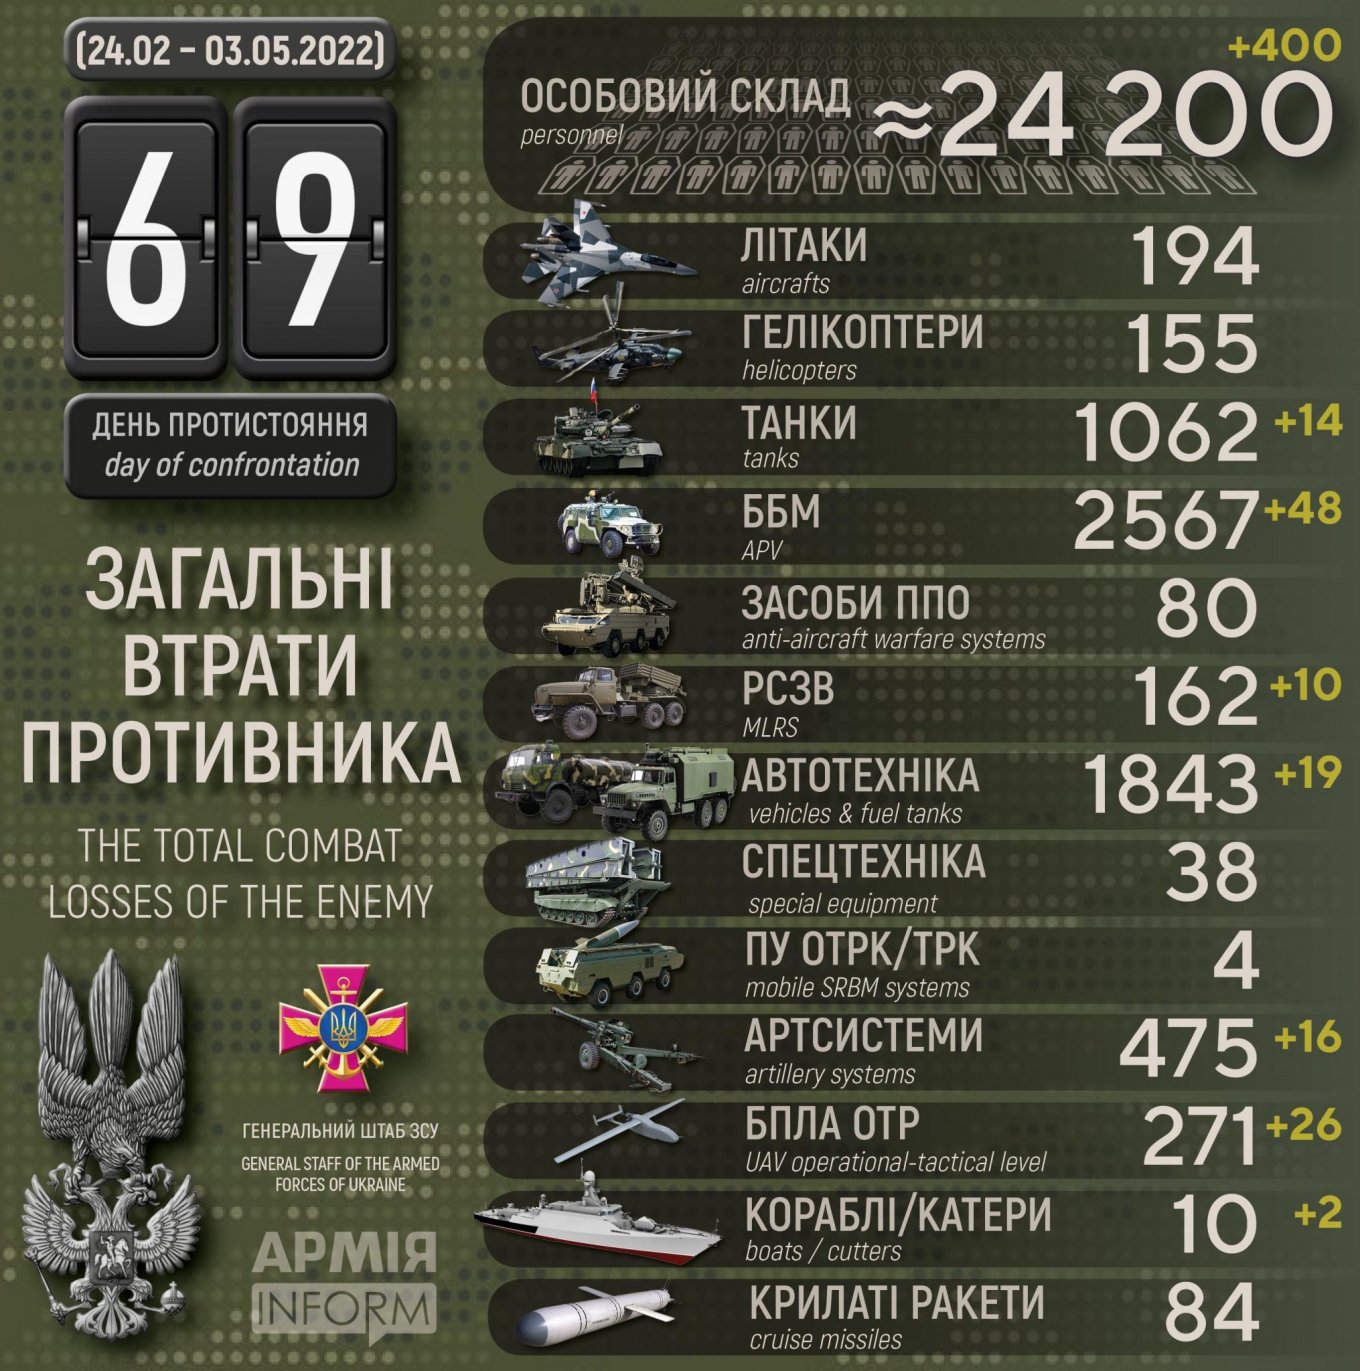 The losses of the Russian army in the full-scale war against Ukraine exceeded 24,000 soldiers